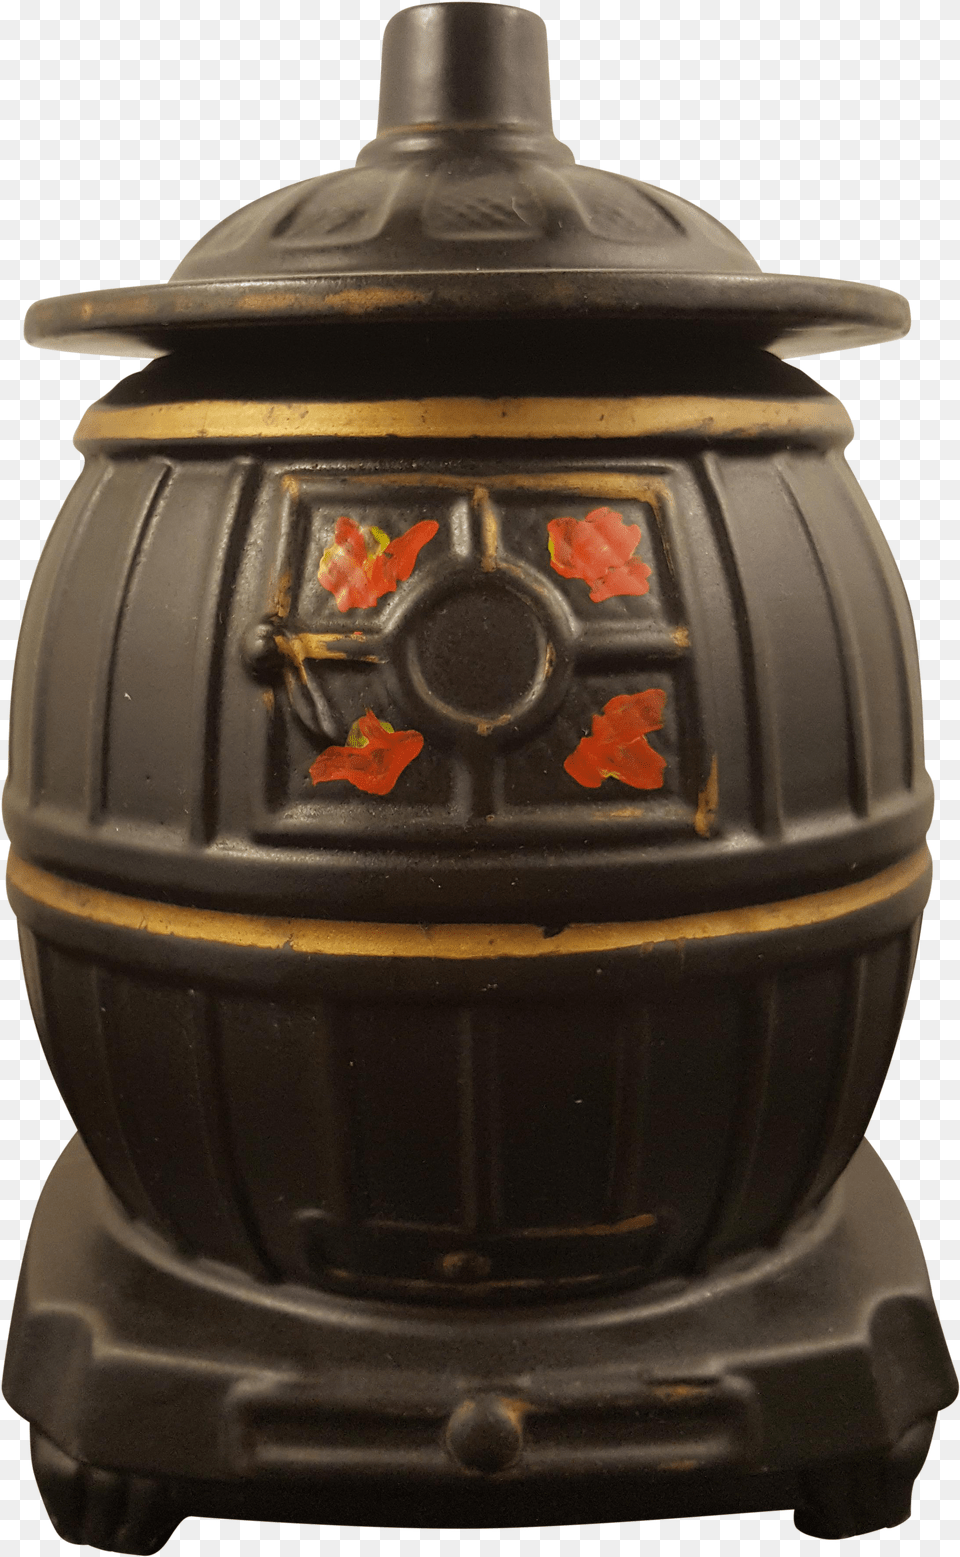 Mccoy Pot Belly Stove Cookie Jar Stove Free Png